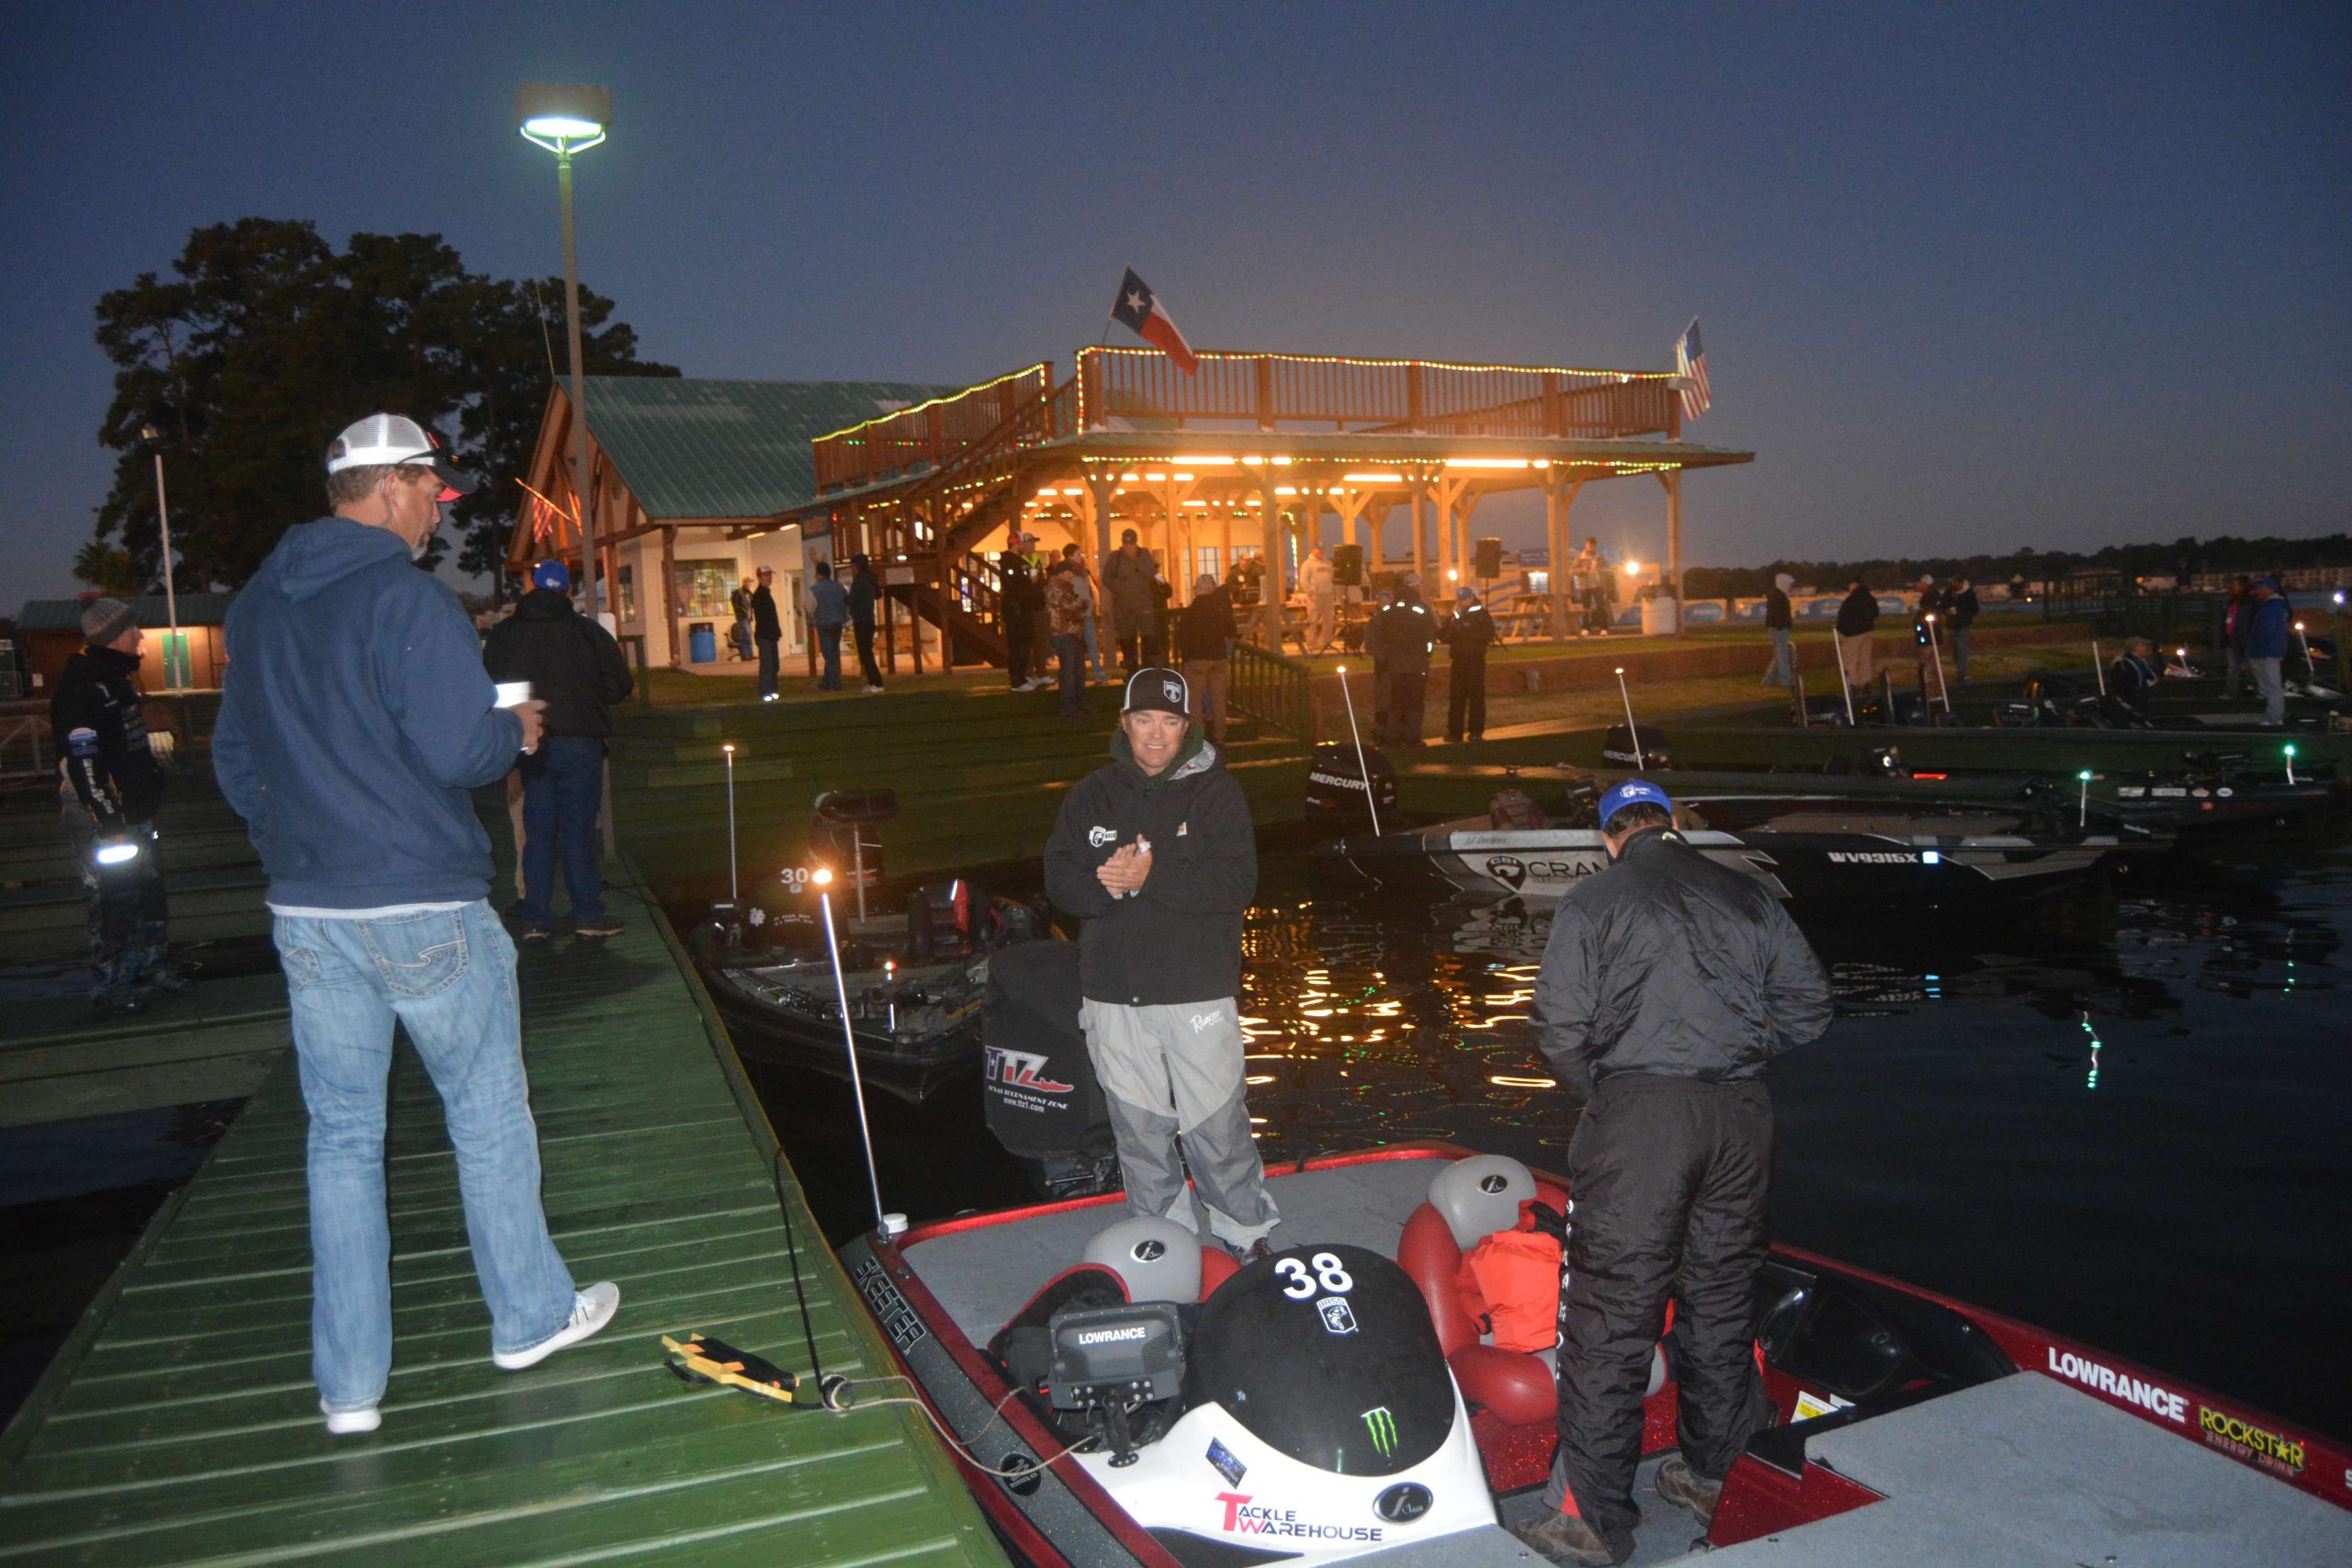 It was in the high 30s this morning at launch. Anglers are working on bundling up for their run.